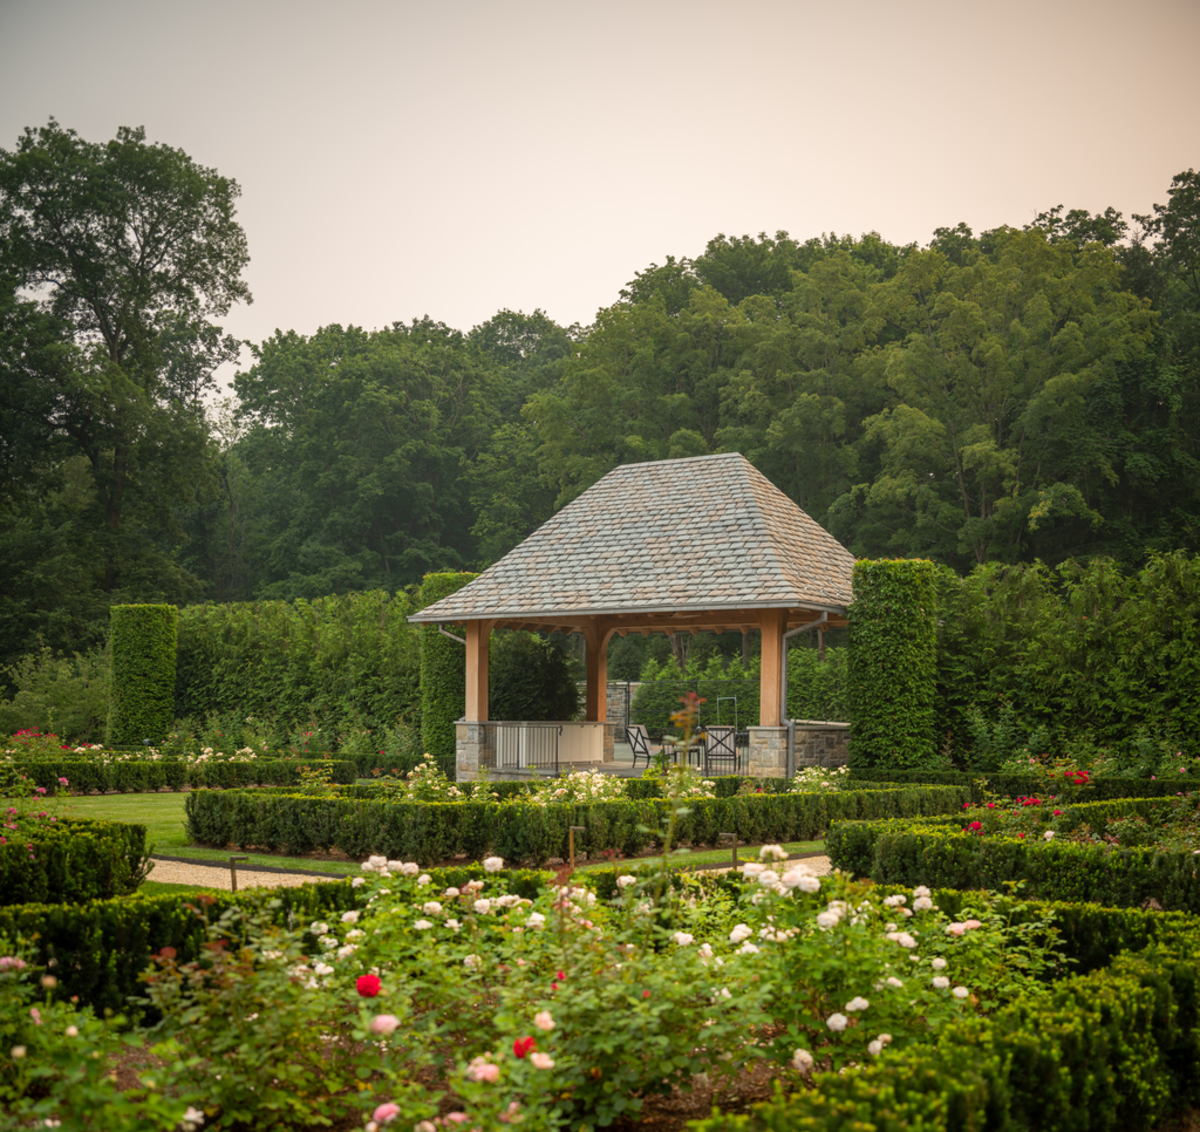 At Rose Manor, whose grounds were designed by Janice Parker Architects, the formal rose garden parterres lead the way to the tennis court pavilion, which is ﬂanked by tightly clipped columnar hornbeams.